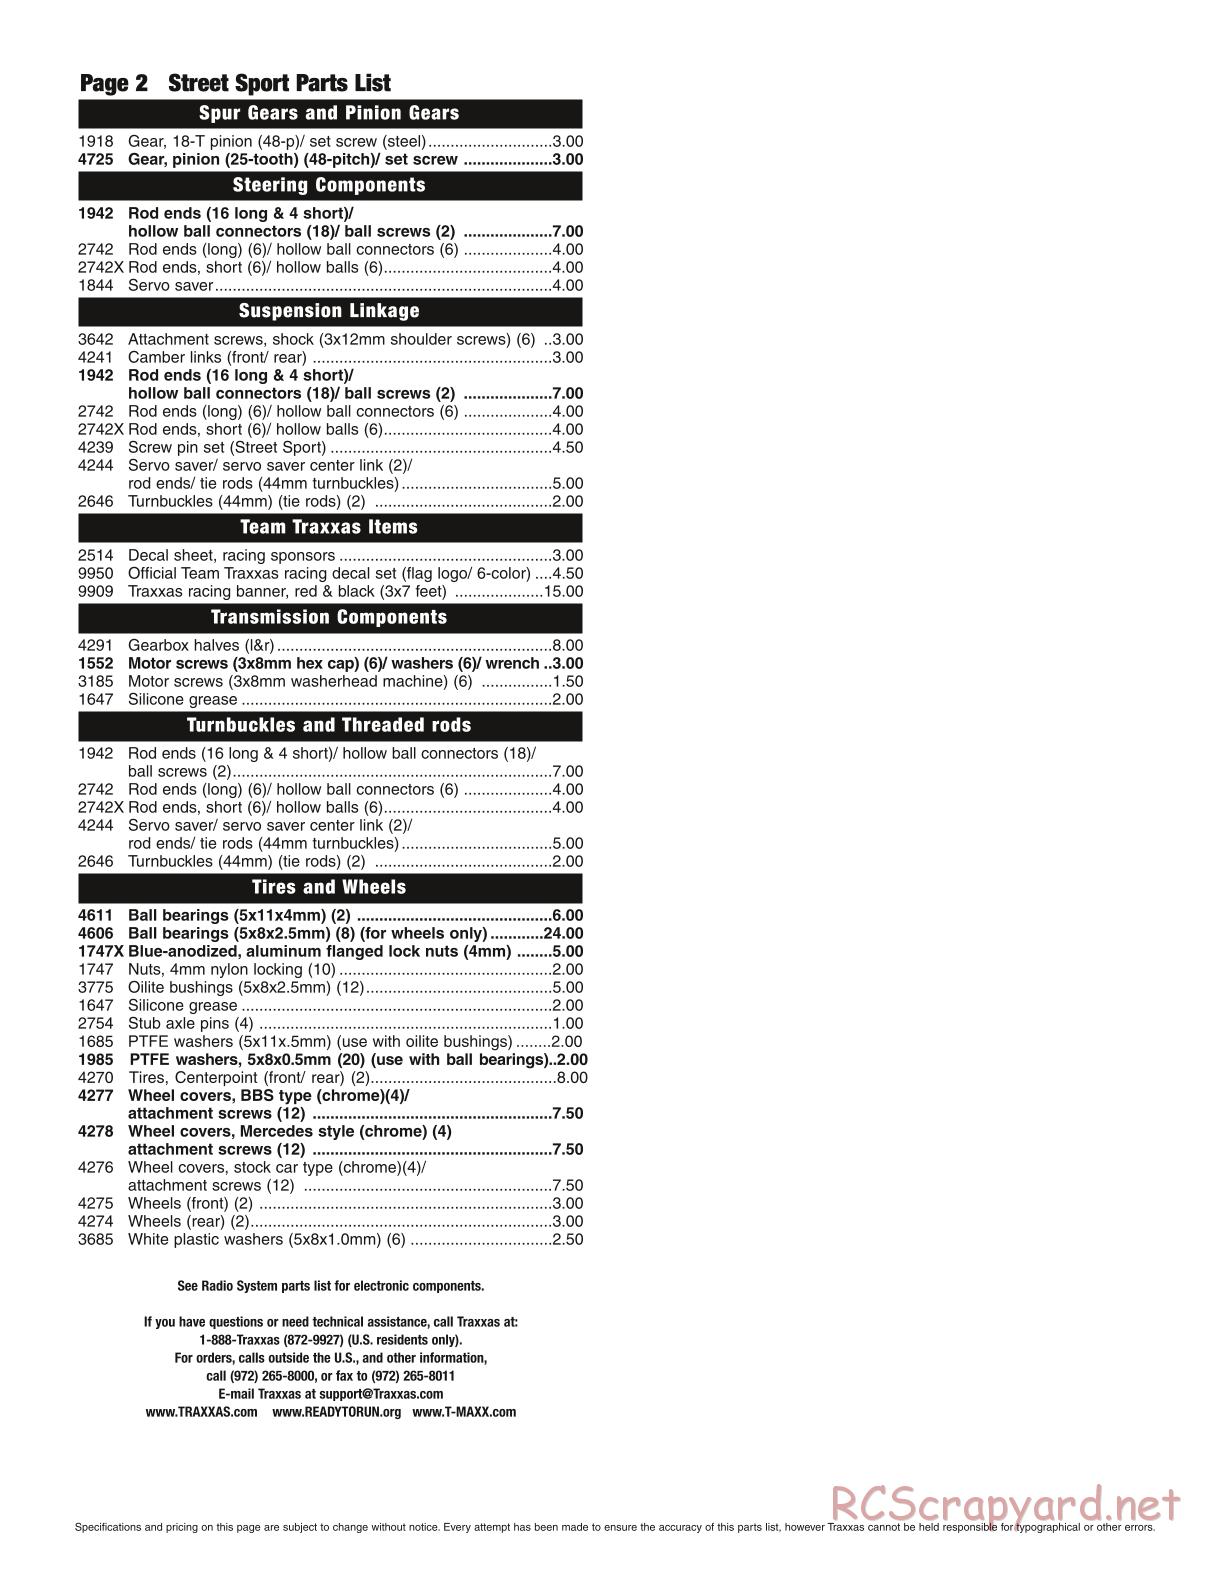 Traxxas - Street Sport - Parts List - Page 2